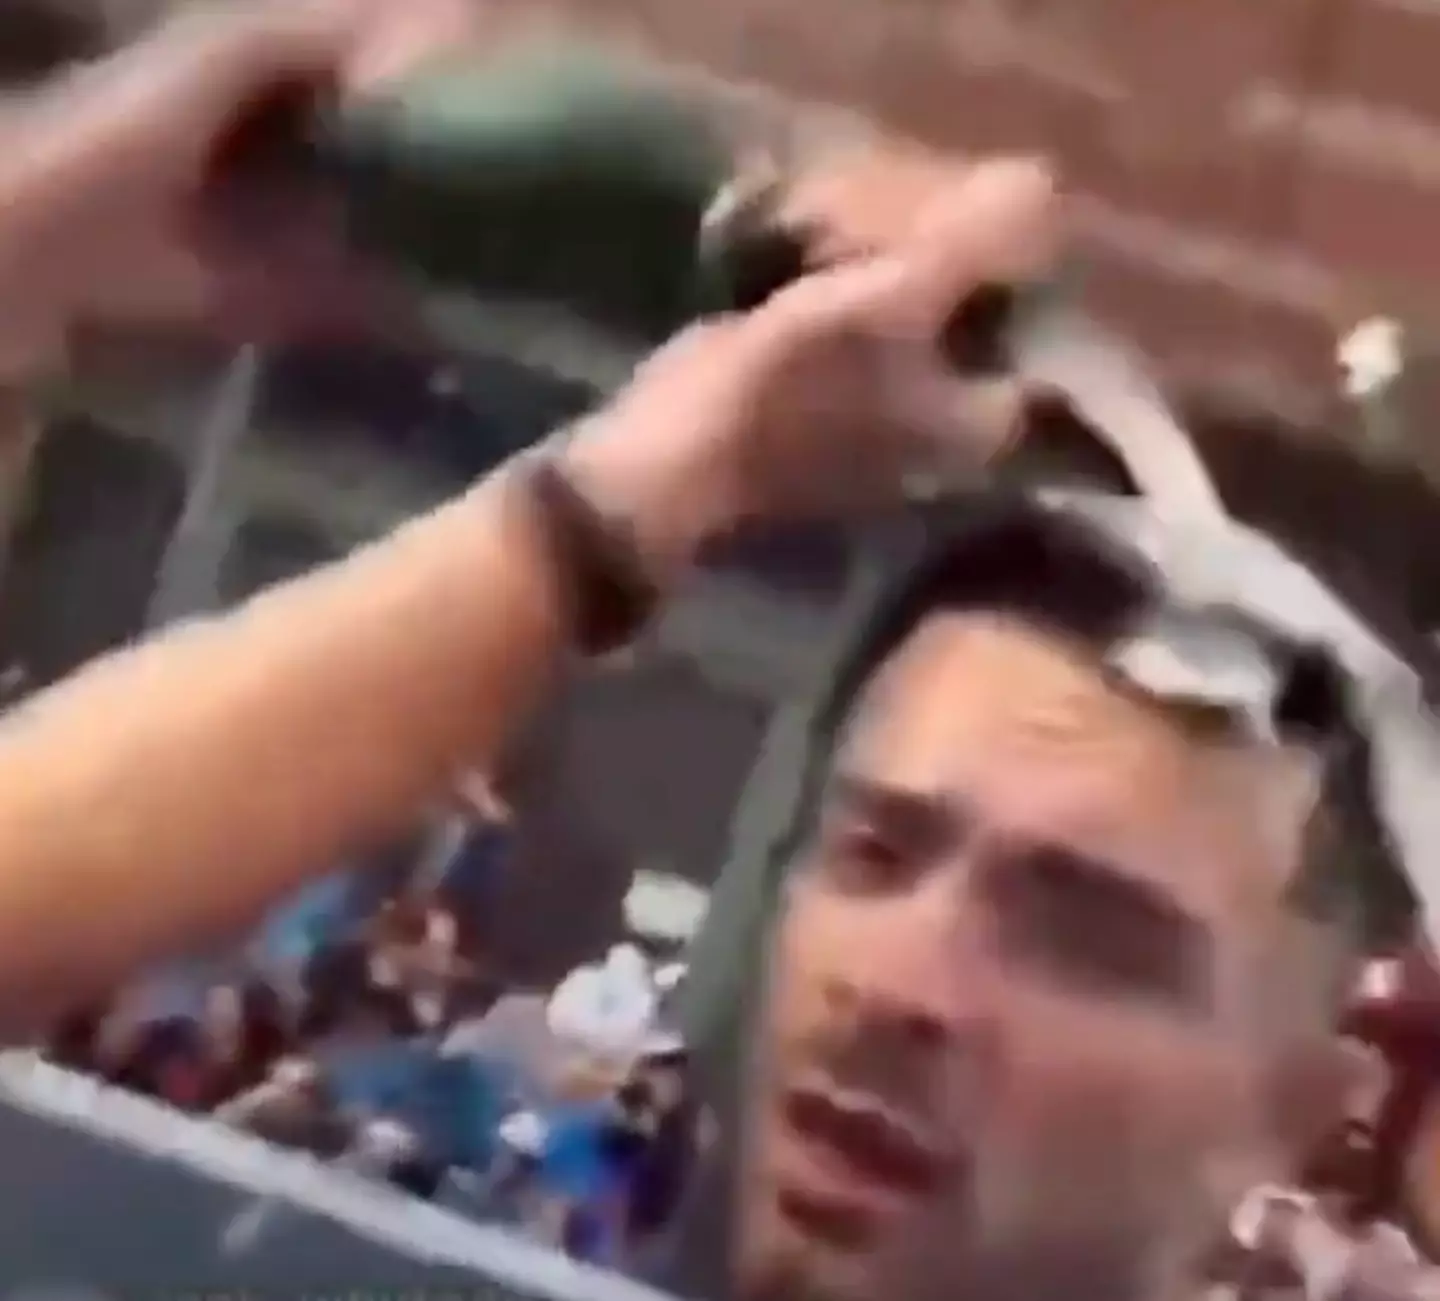 Who needs a shower when you can have beer poured on your head?